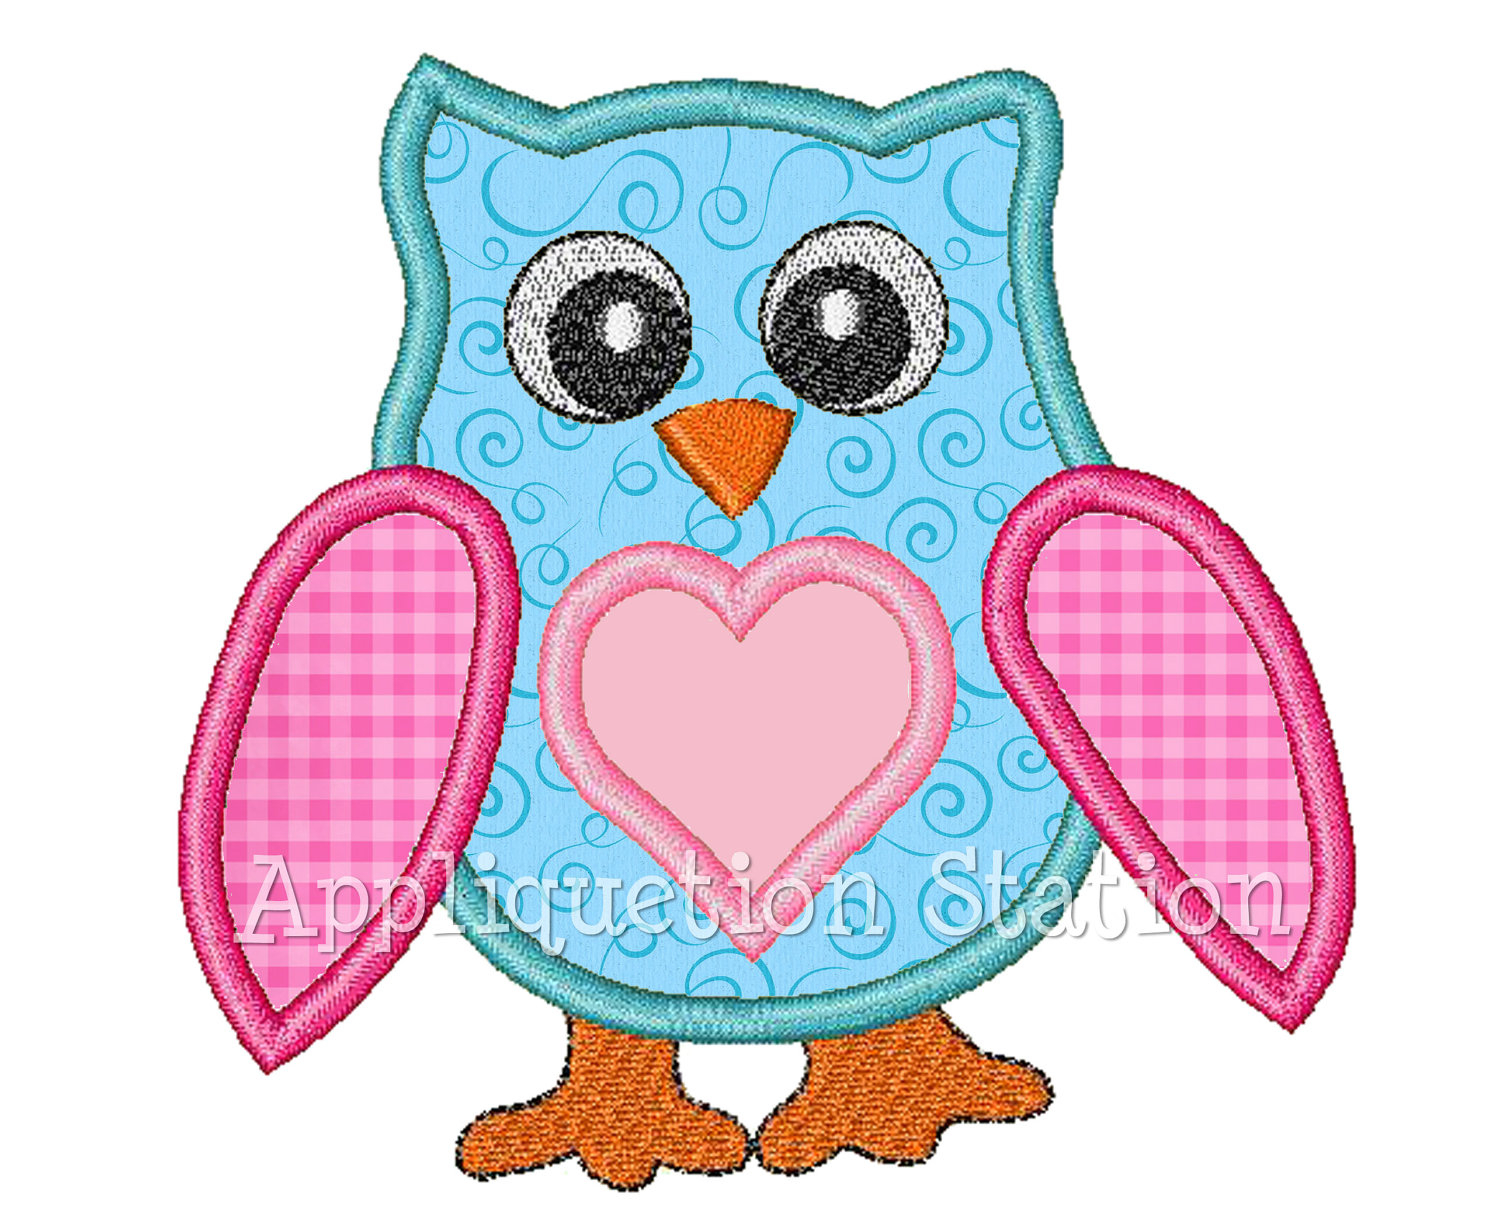 Free Machine Embroidery Patterns 14 Owl Embroidery Designs Free Download Images Free Owl Applique